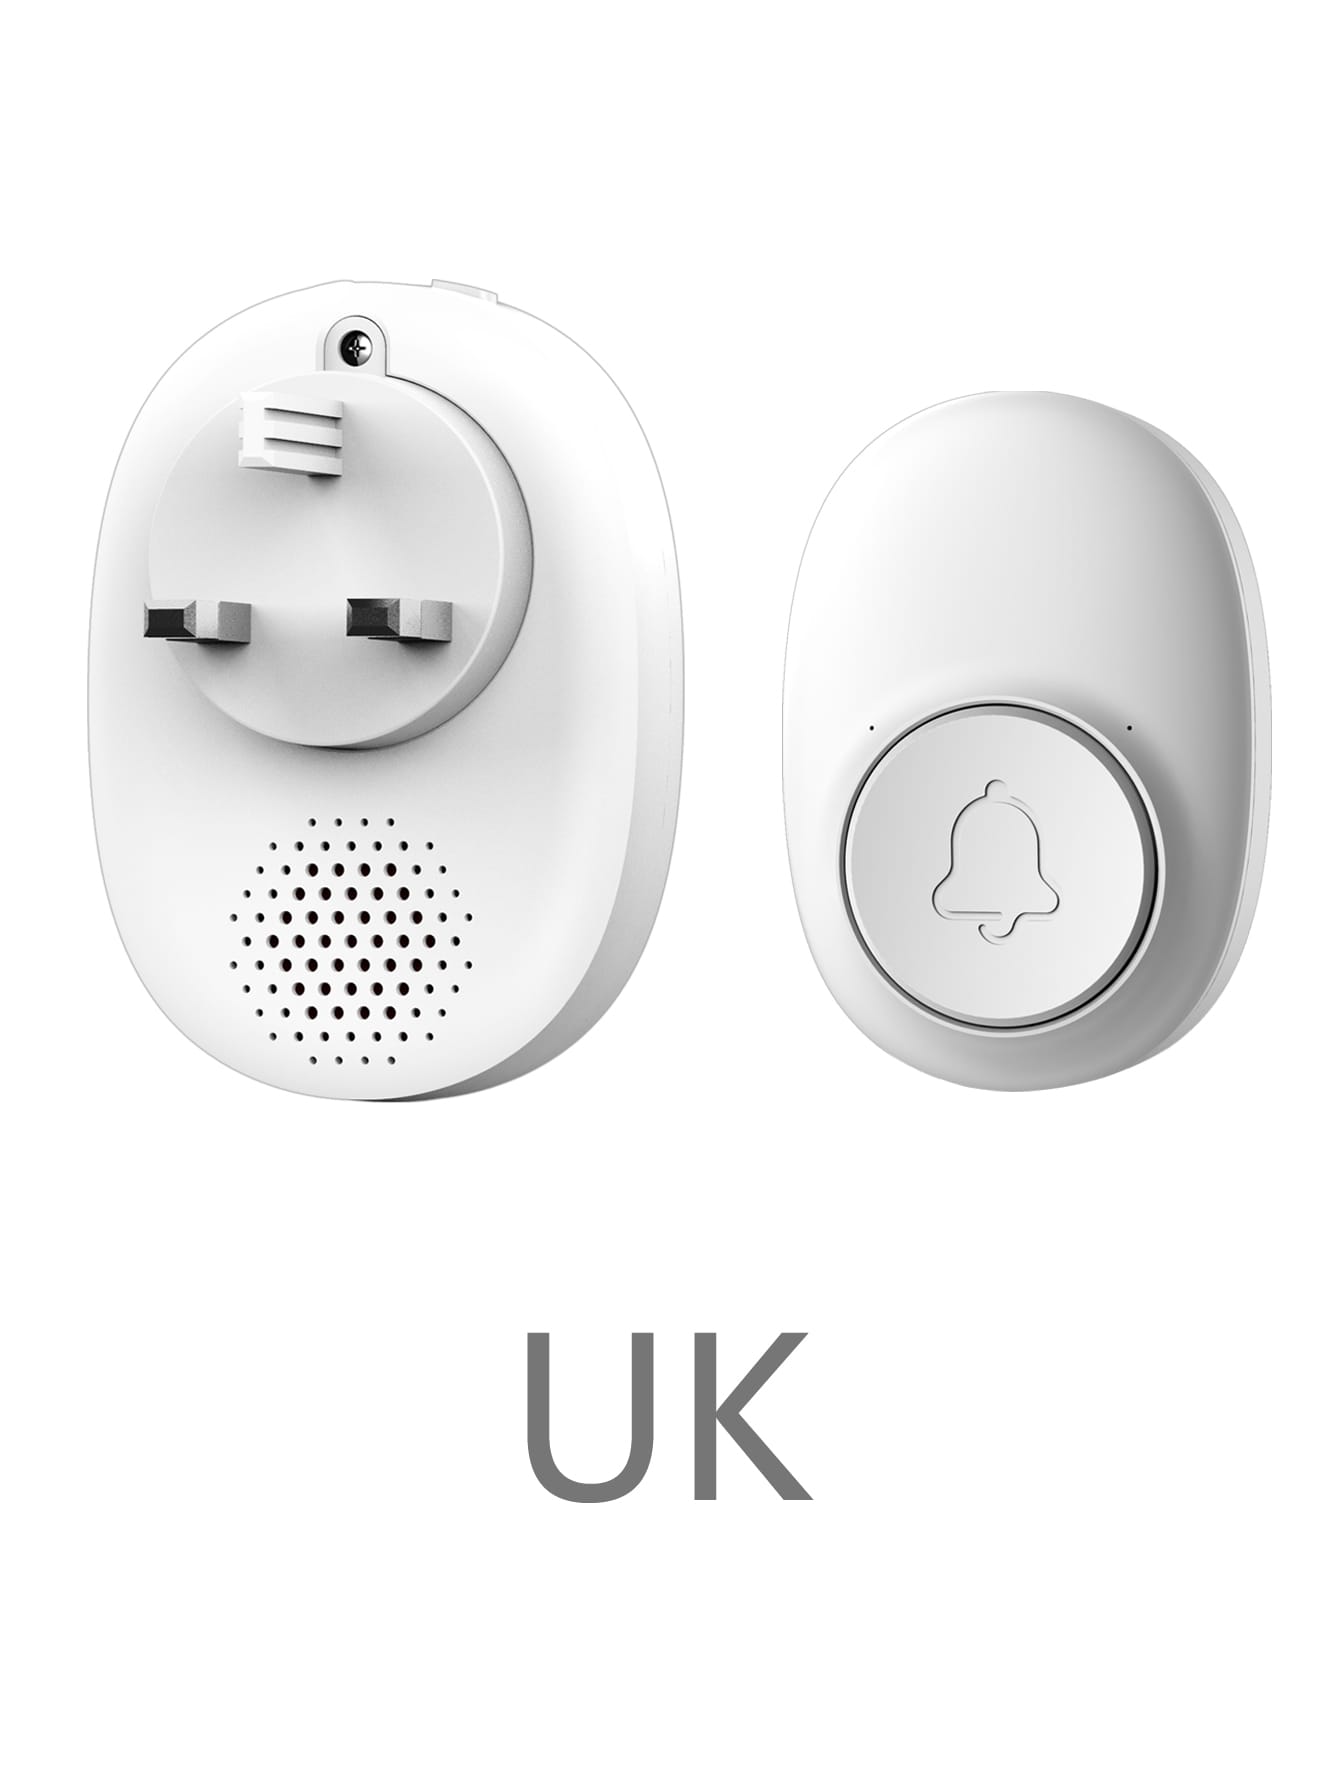 Wireless Intelligent Doorbell With Remote Control Button And Waterproof Electronic Receiver, Including 1 Transmitter, 1 Receiver, 1 Battery, 1 User Manual, Double-sided Tape And 2 Screws, Suitable For Uk/us/eu Standards, Ideal For Elderly. Sleek--1